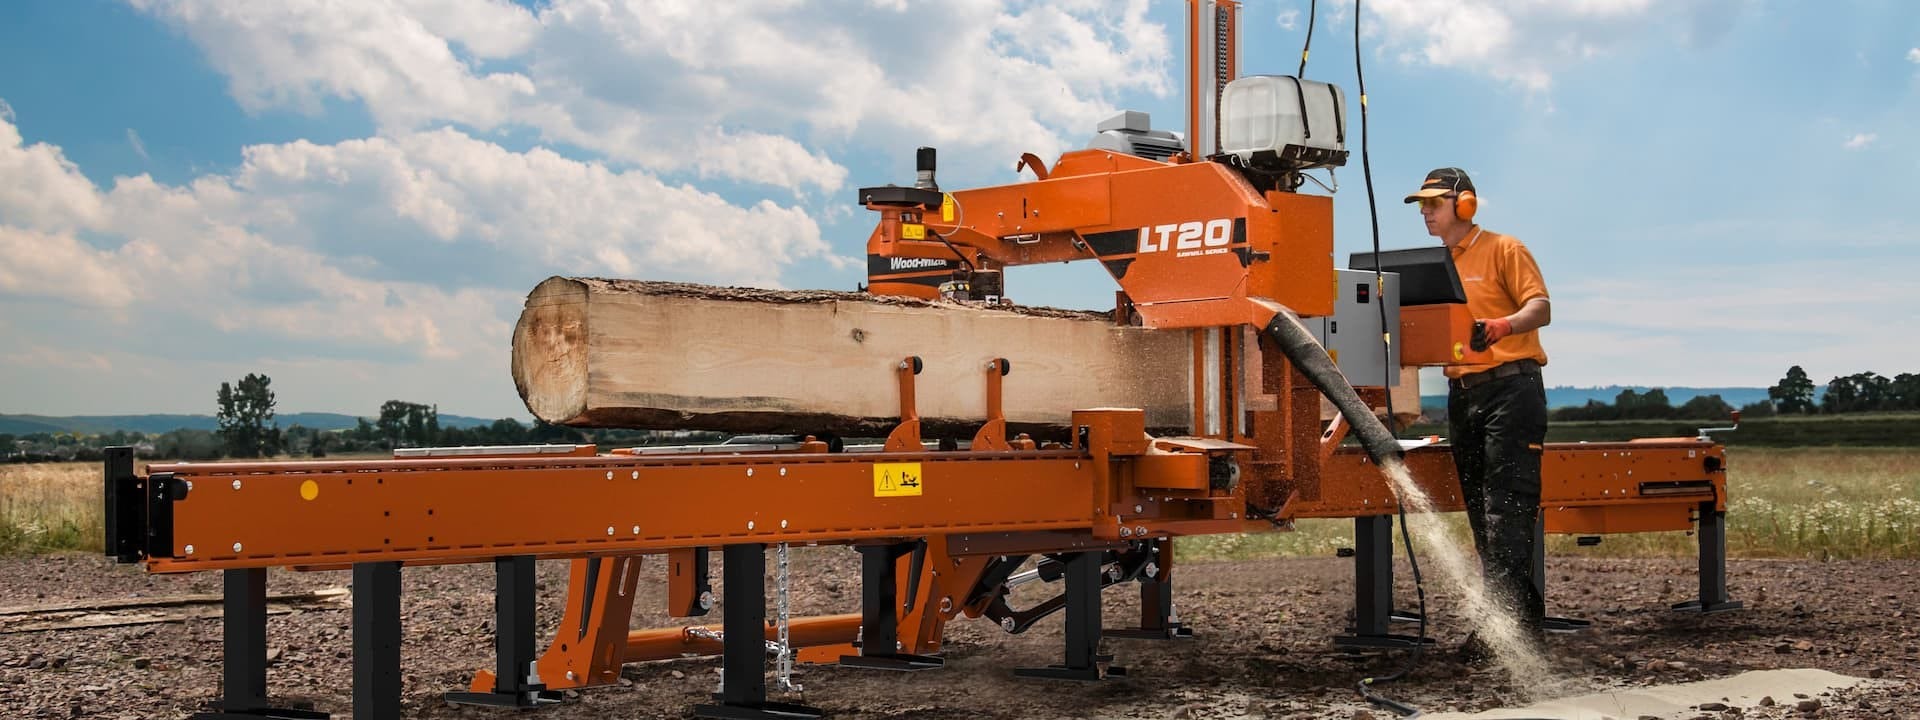 Wood-Mizer LT20 sawmill with hydraulics and a debarker on a PROMOTION